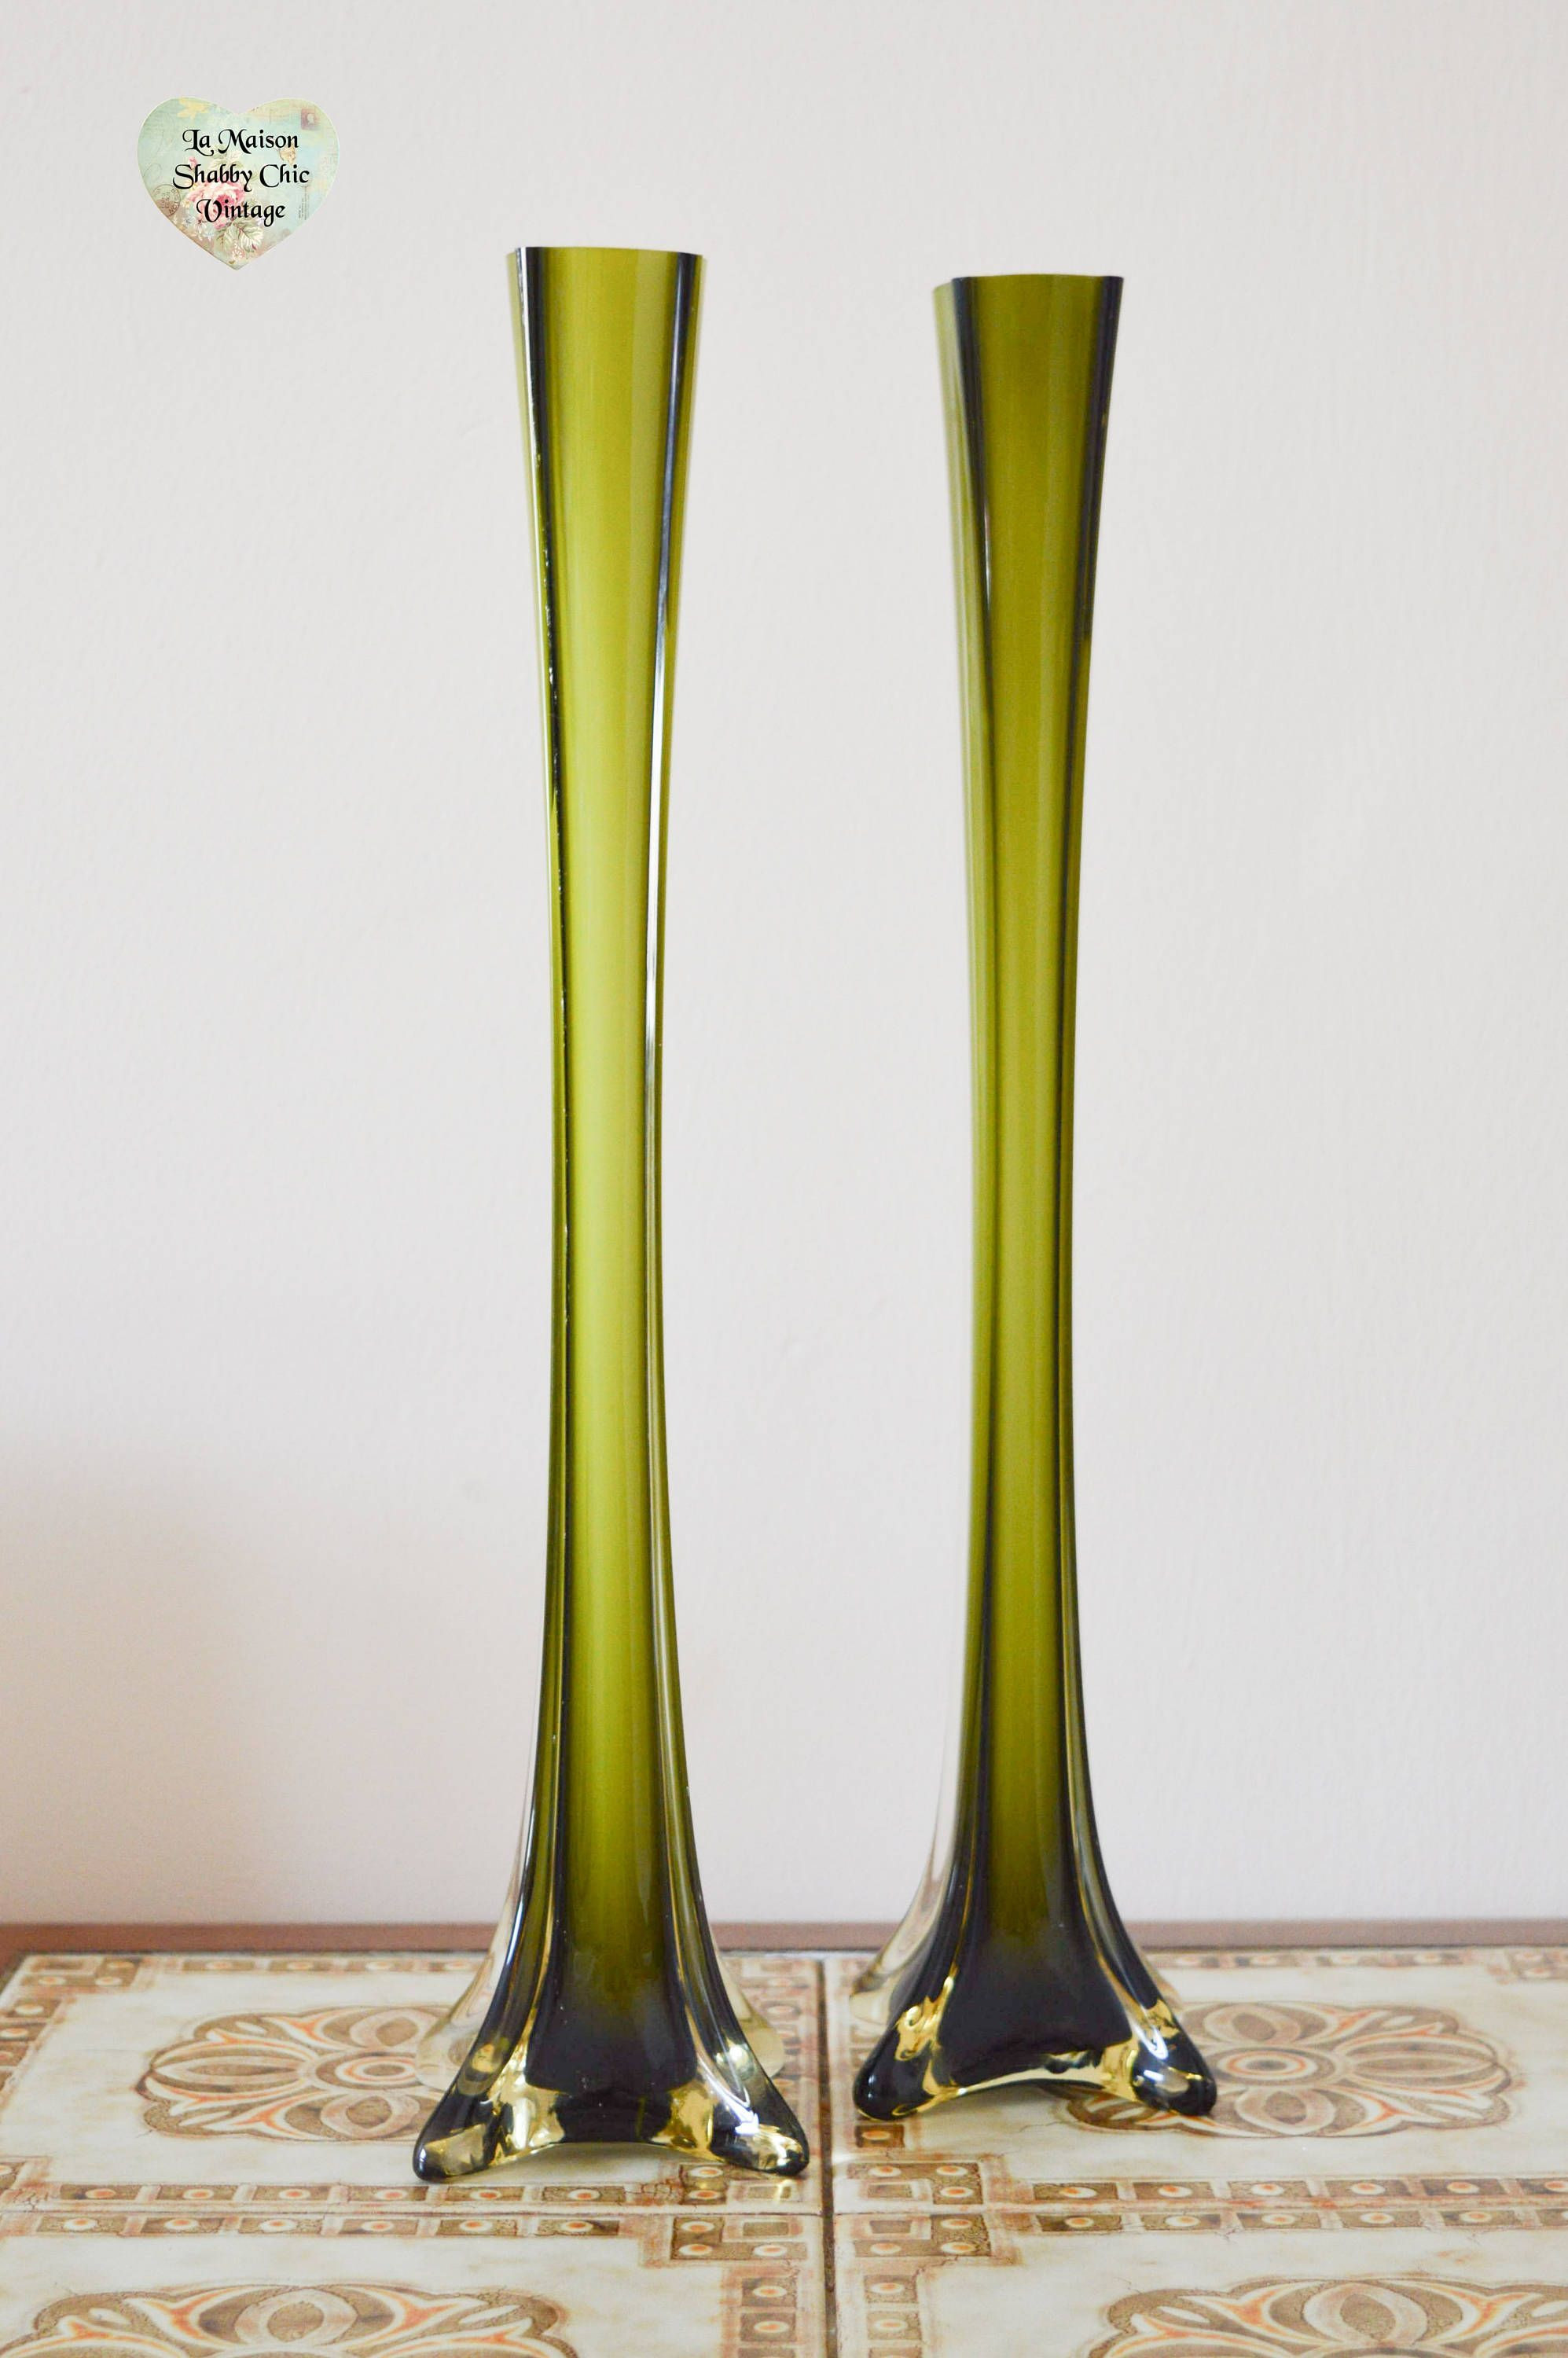 15 Stylish Antique Milk Glass Vases 2023 free download antique milk glass vases of 35 antique green glass vases the weekly world with regard to retro skinny glass vases pair 2 shades of green retro flower vases